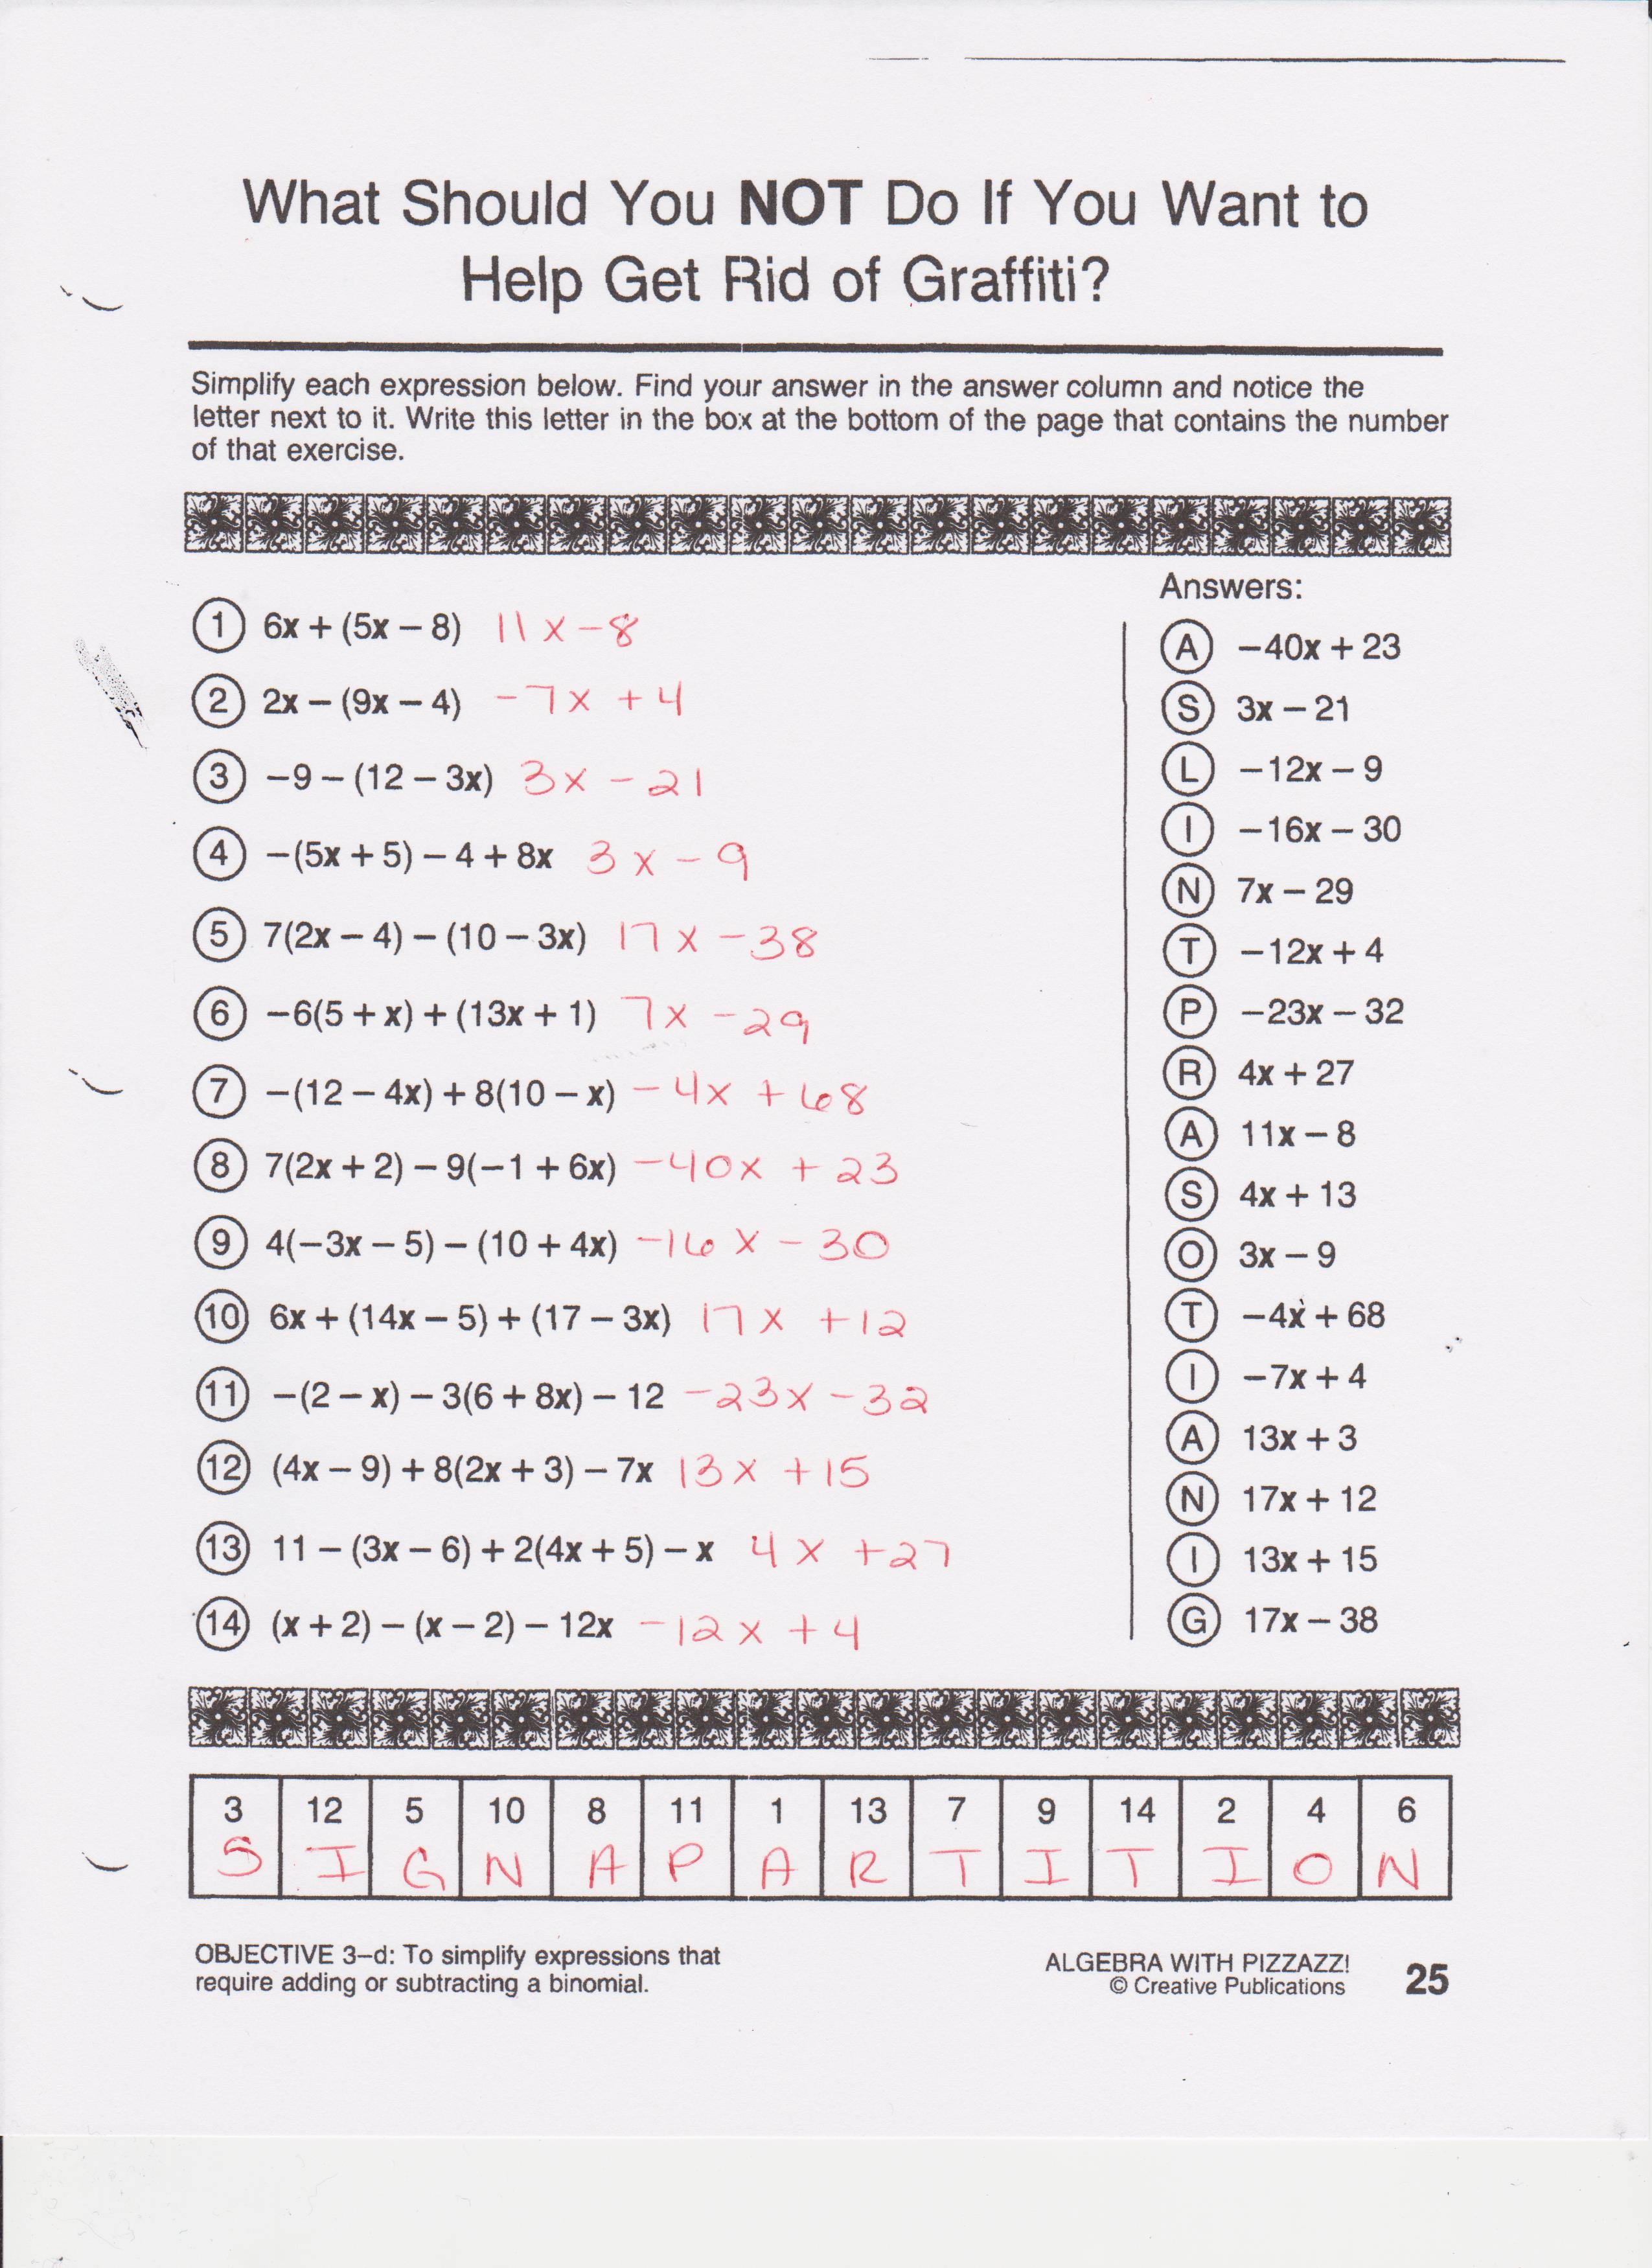 simplifying-expressions-extra-practice-mrs-wilson-th-grade-ac-math-51480-hot-sex-picture